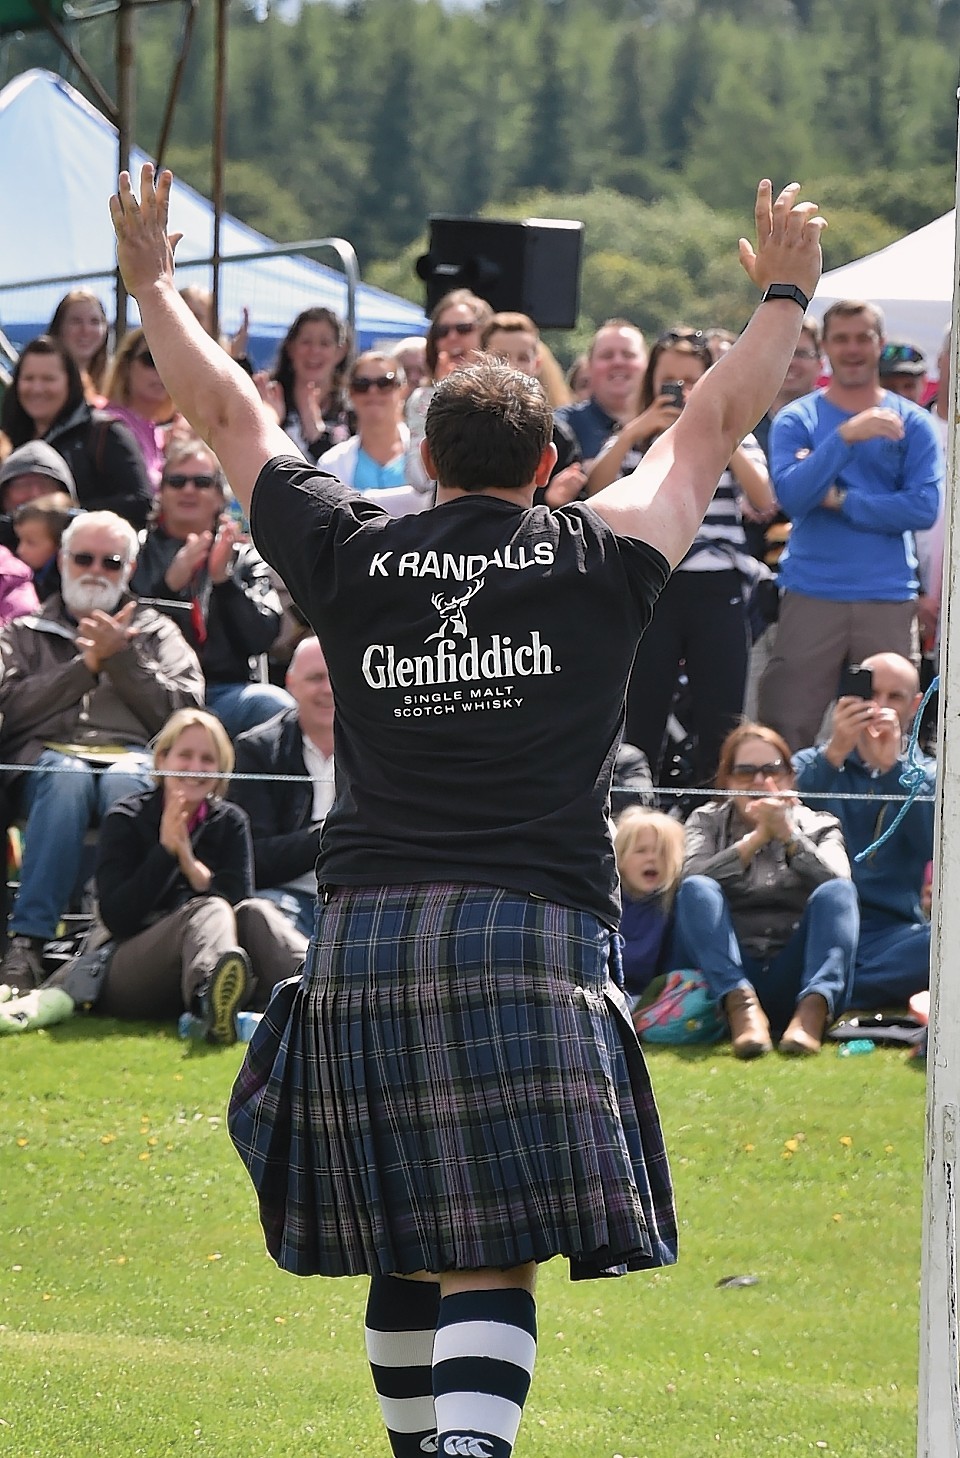 Aboyne Highland Games - Weight over bar - record was broken by Kyle Randall with a throw of 17ft 5in. (previous record was 17ft 2) Picture by COLIN RENNIE